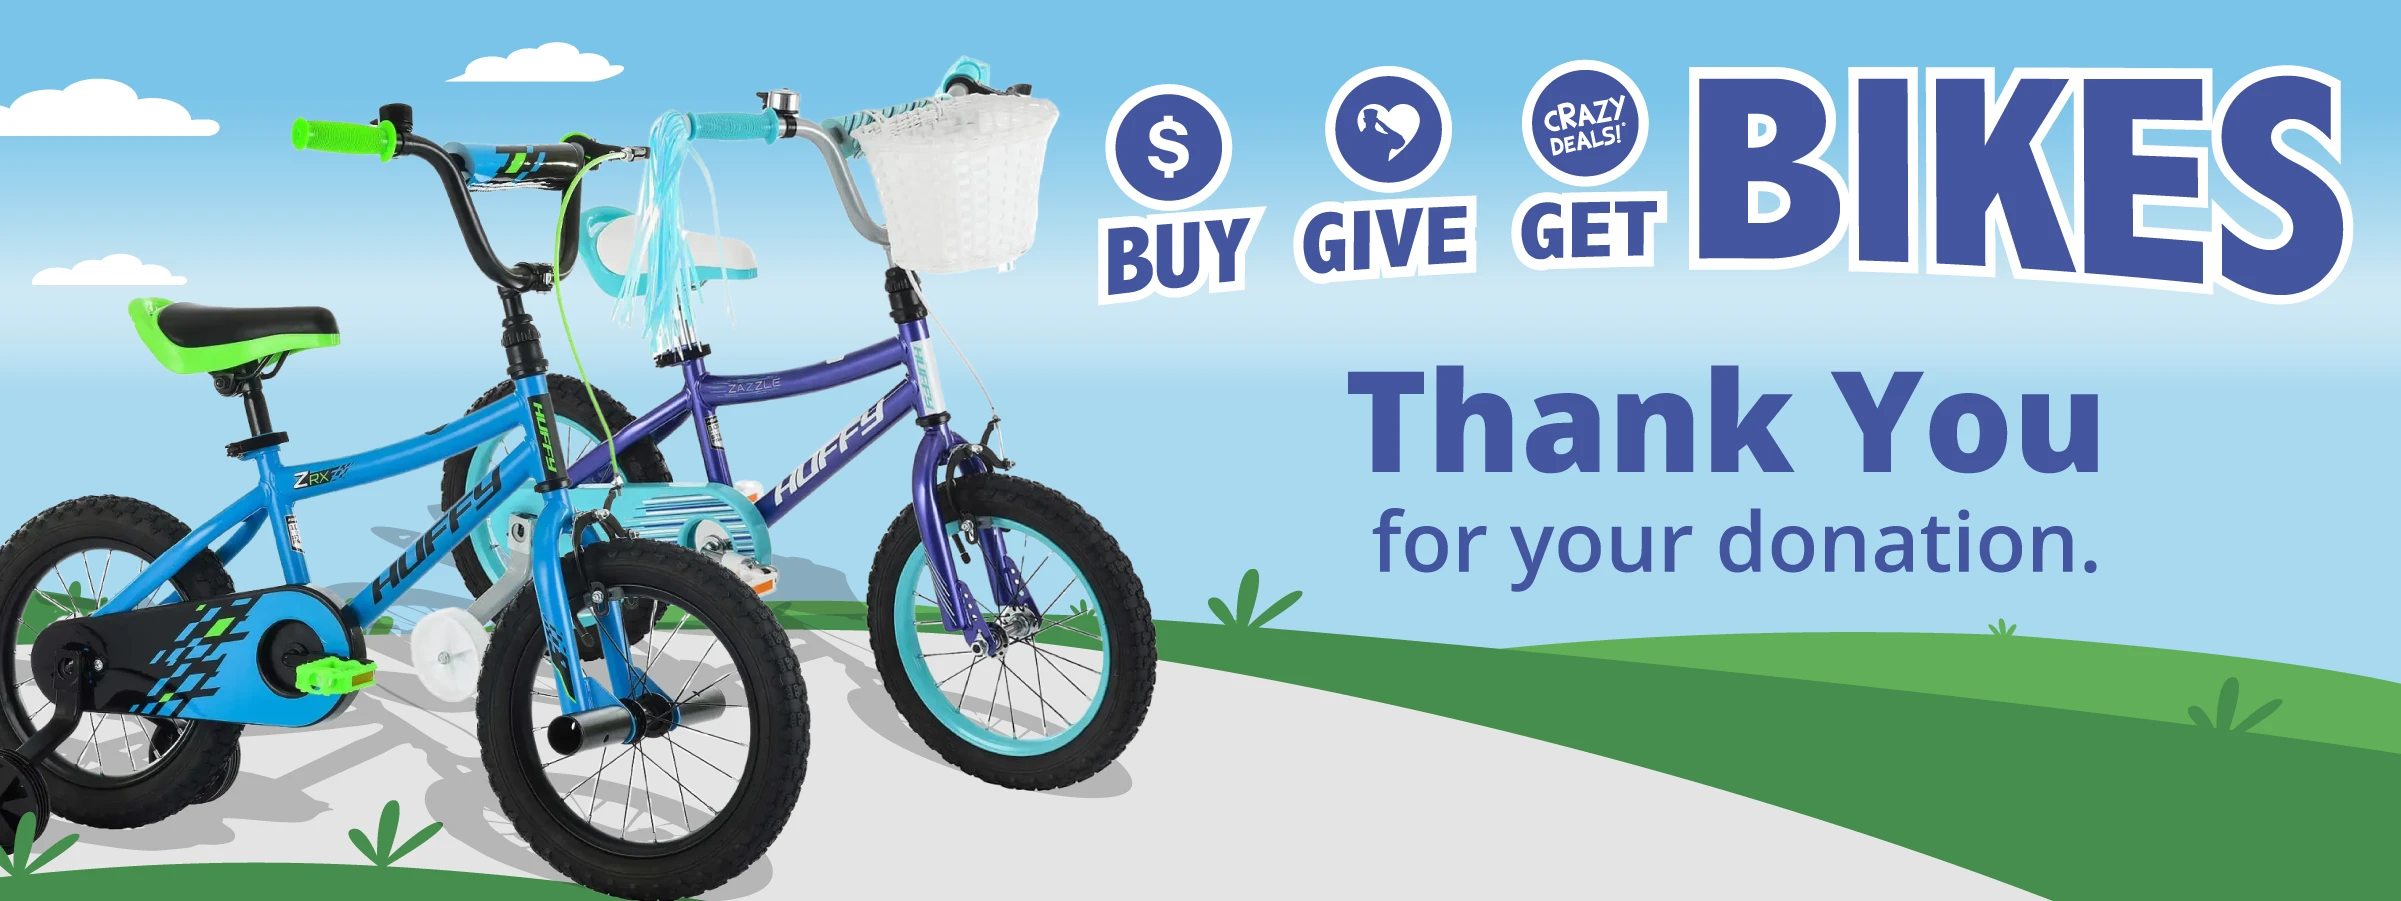 Thank you hero image for Ocean State Job Lot’s Buy-Give-Get Bikes program.